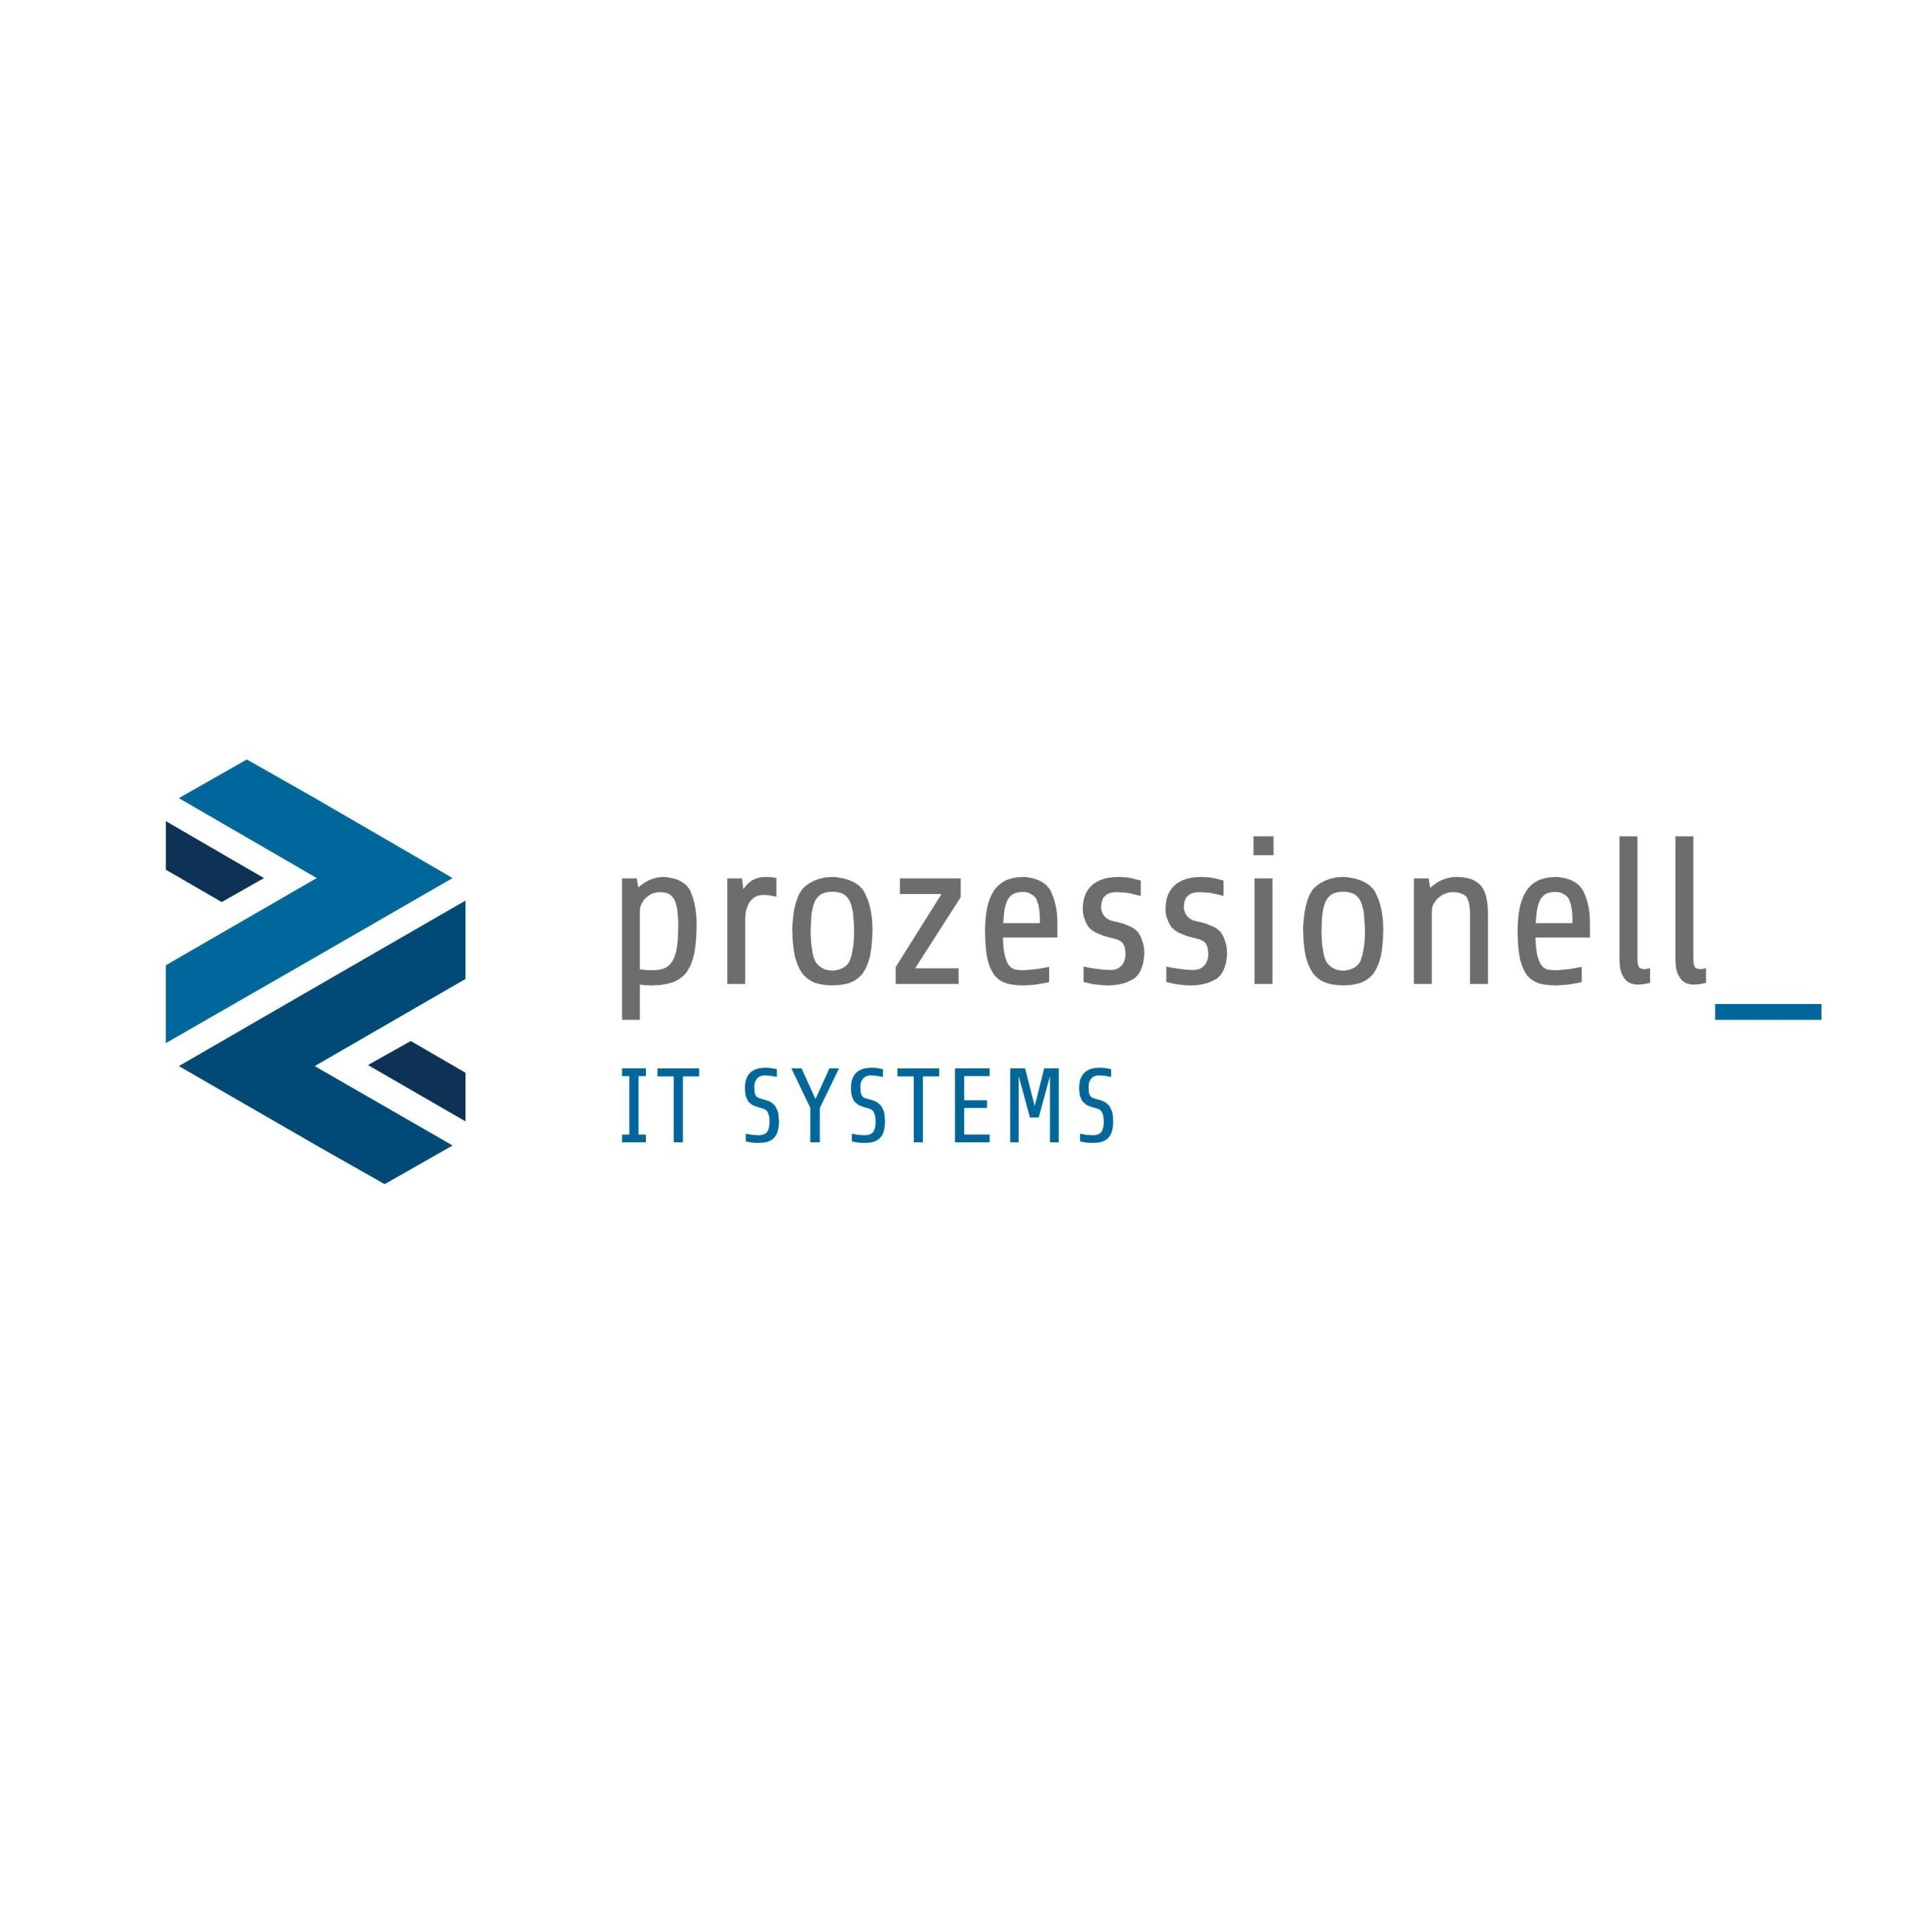 Prozessionell IT Systems in Oberzissen - Logo